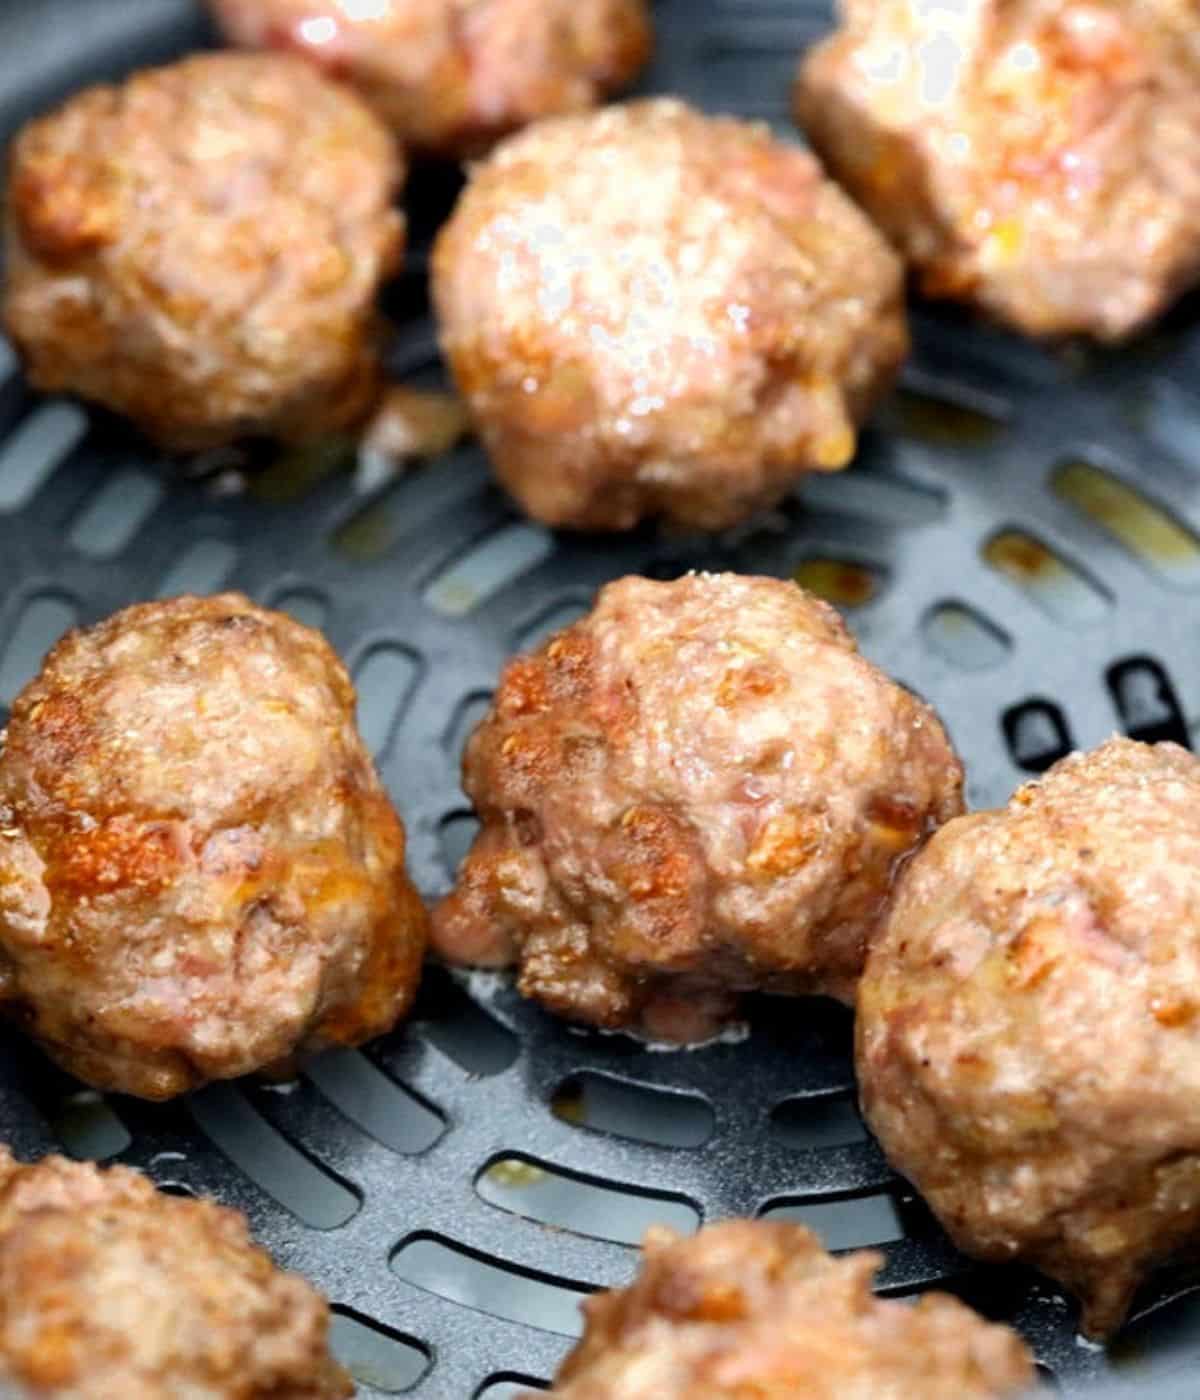 air frying the meatballs